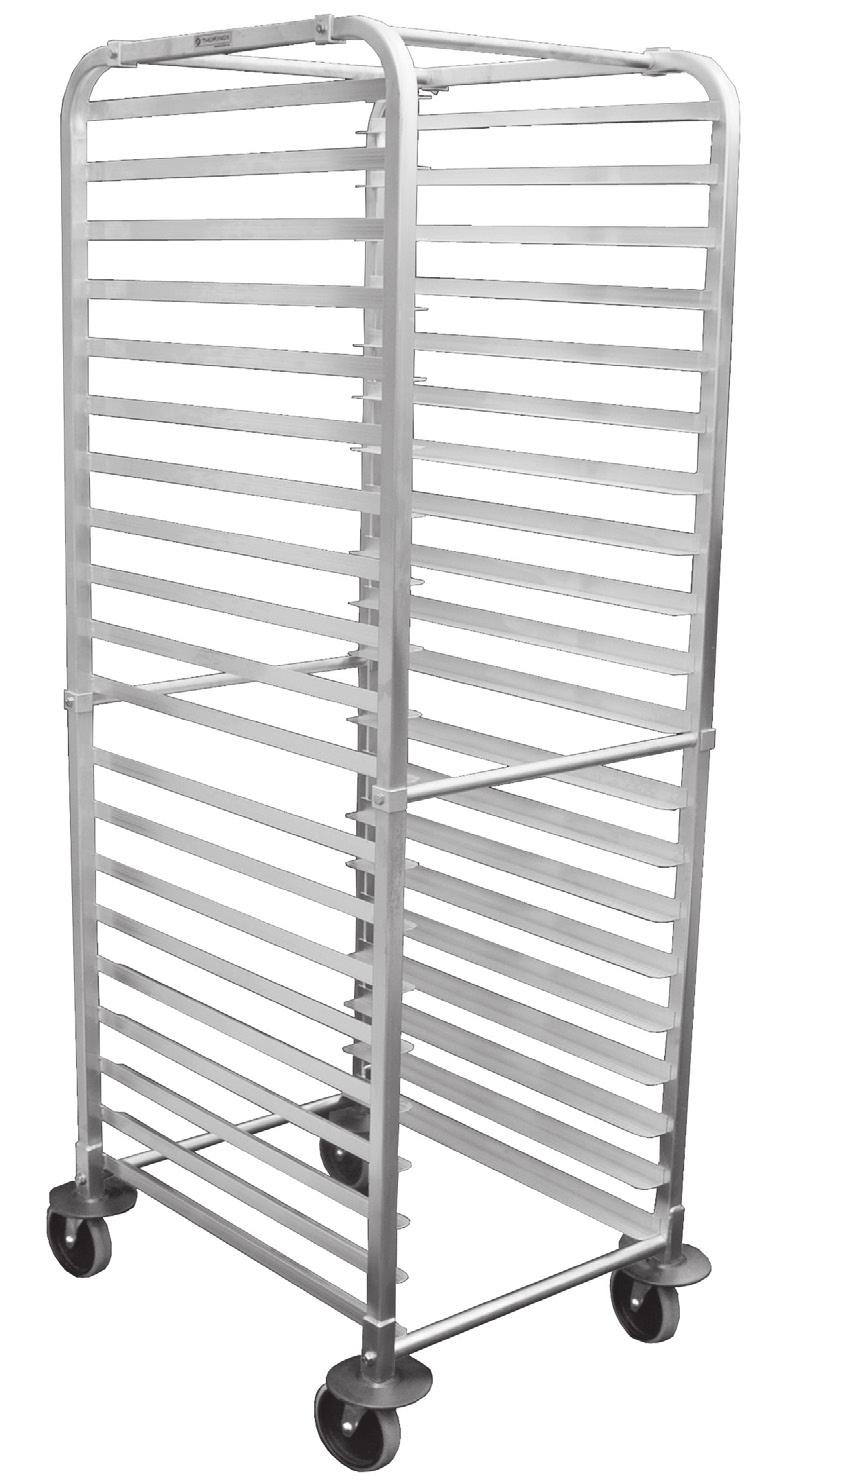 ALUMINUM BUN PAN RACKS Made with NEW aluminium Delivered knocked down Easy to assemble Rounded corners Welded tray slides Protective U channel support Non marking casters Reinforcement bars in the